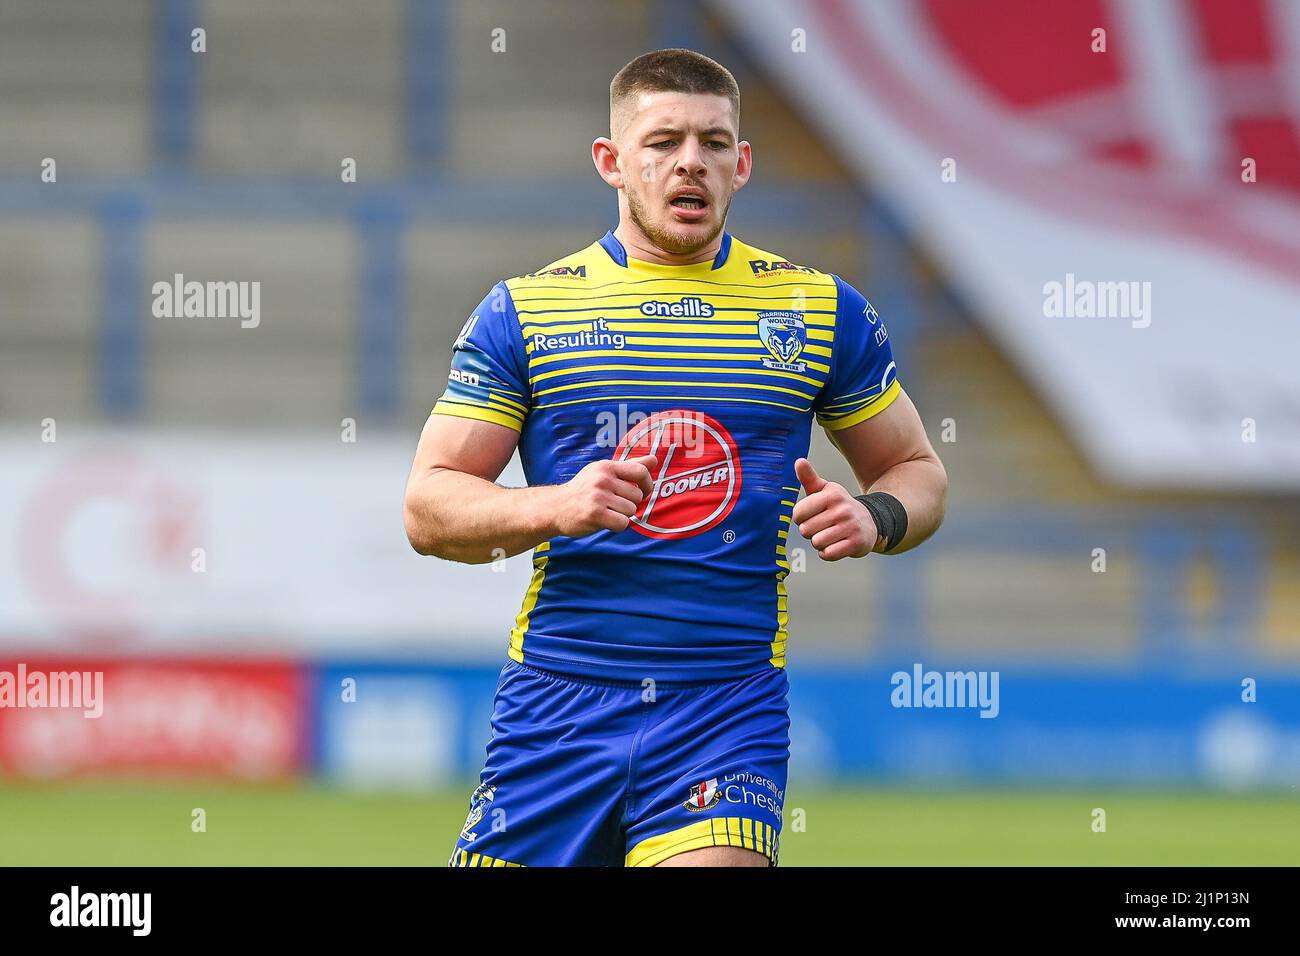 Danny Walker #16 of Warrington Wolves during the game in ,  on 3/27/2022. (Photo by Craig Thomas/News Images/Sipa USA) Stock Photo